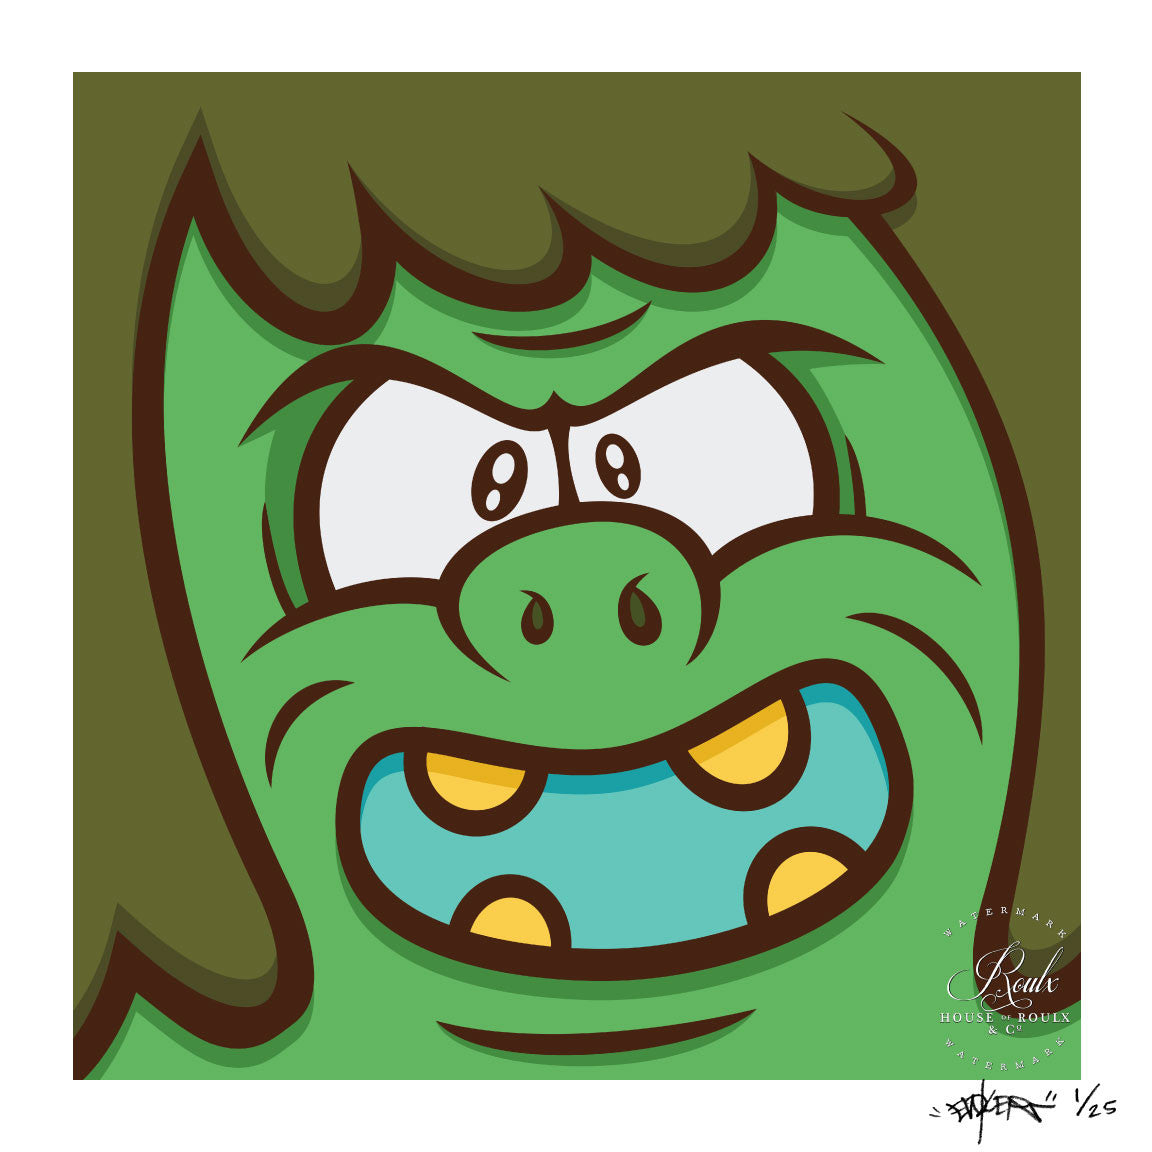 Evoker &quot;Angry Green Man&quot; -  Archival Print, Limited Edition of 25, 16 x 16&quot;